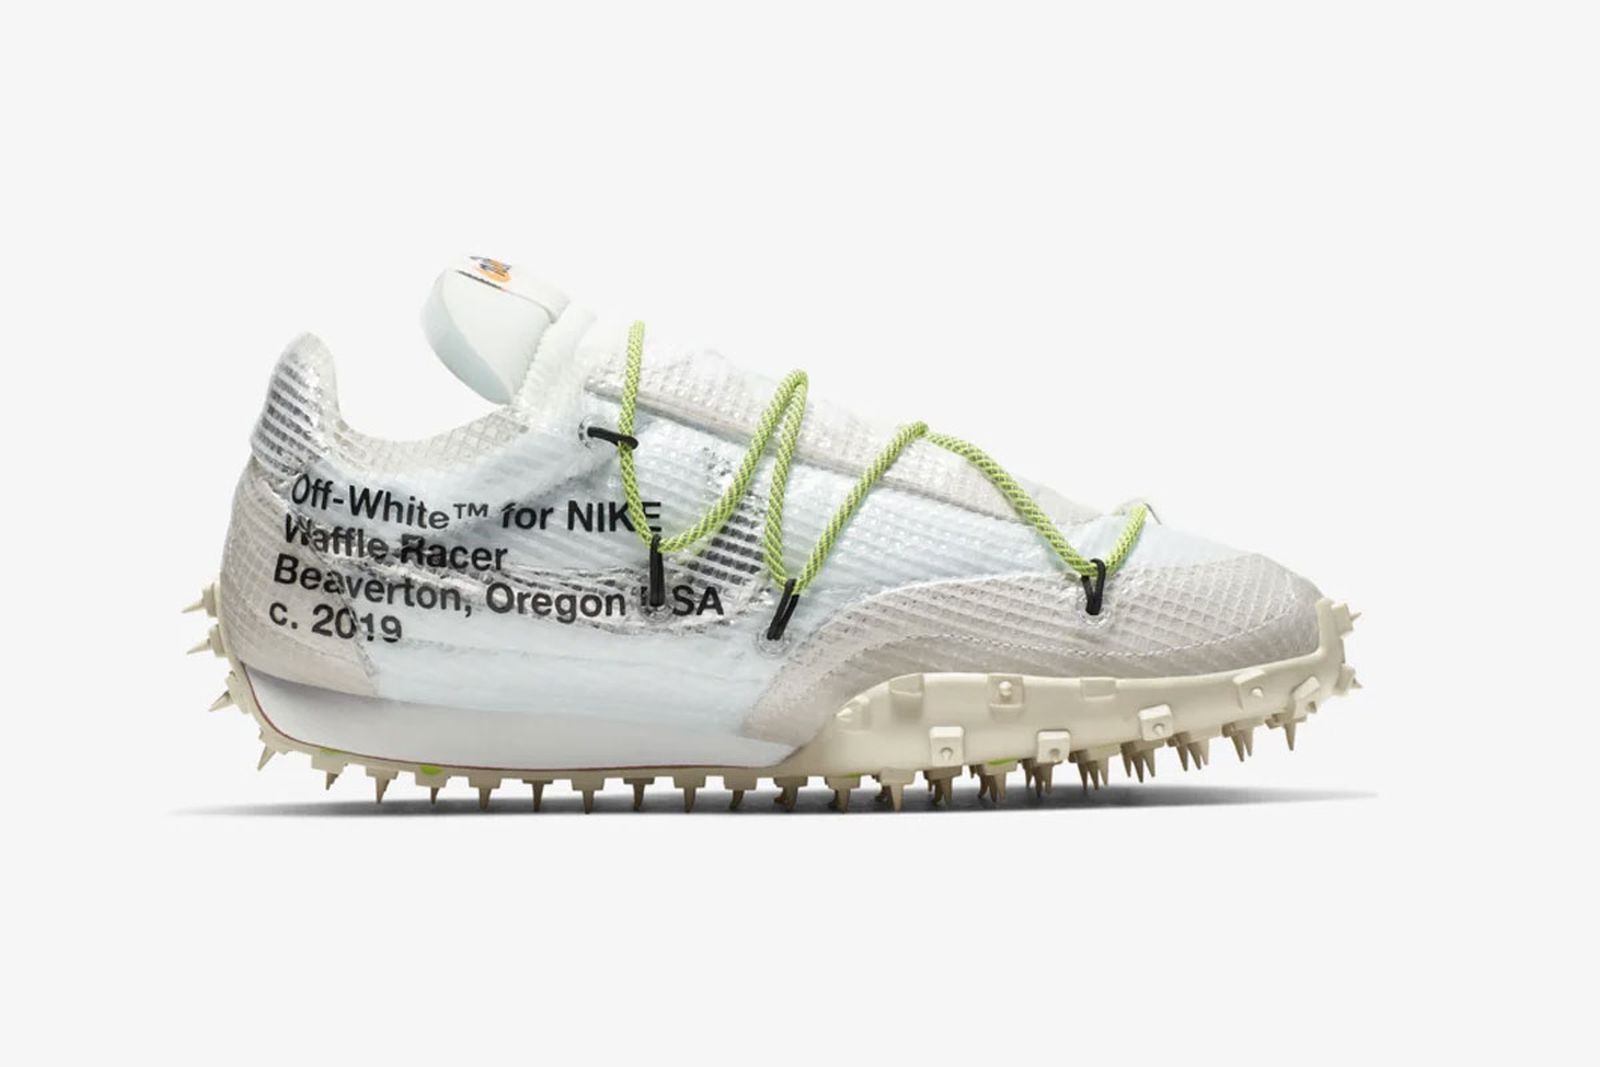 off-white-nike-waffle-racer-sp-release-date-price-10